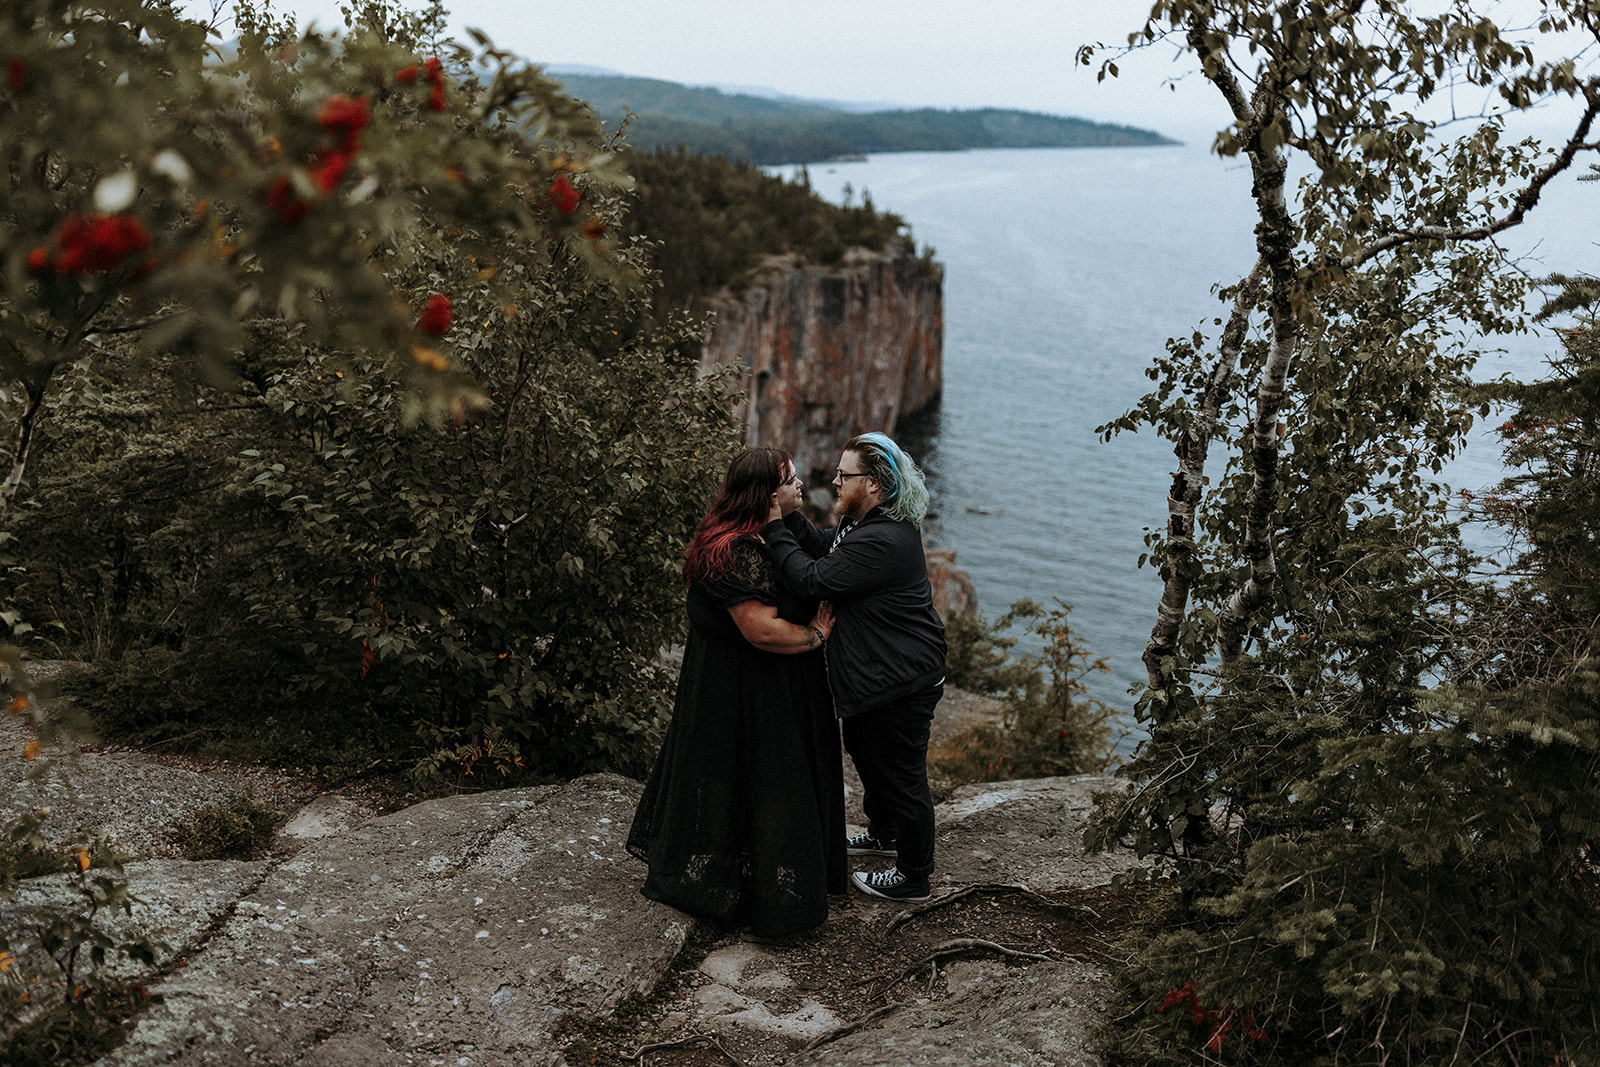 A gothic plus size wedding couple in all black clothes standing near a cliff with red roses in the foreground.